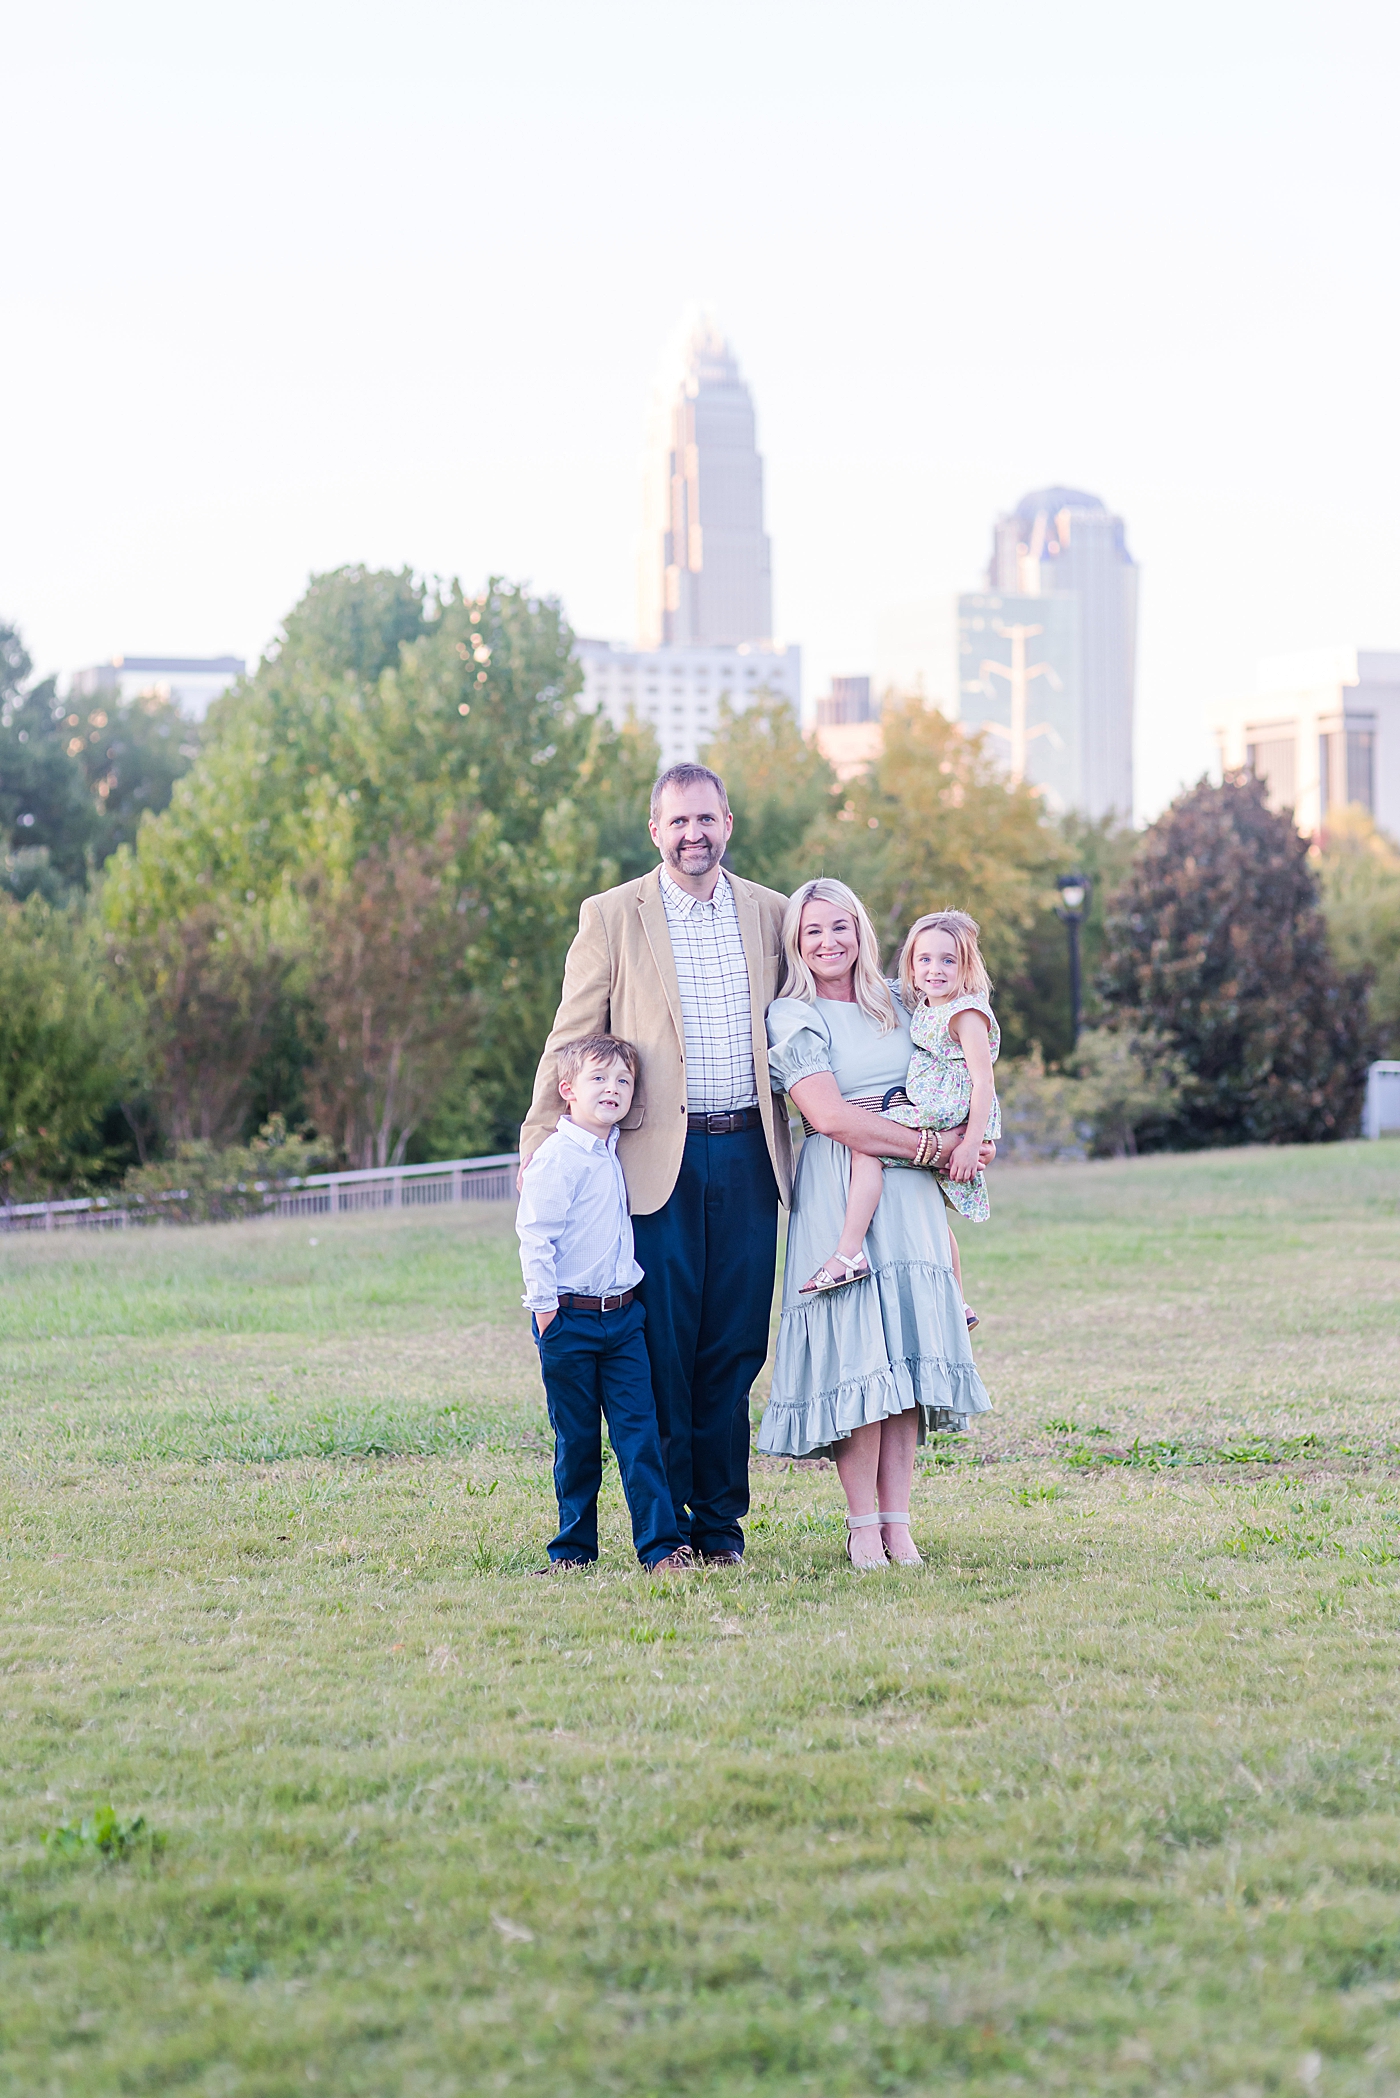 Family standing in a park in front of Charlotte skyline | Photo by Anna Wisjo Photography